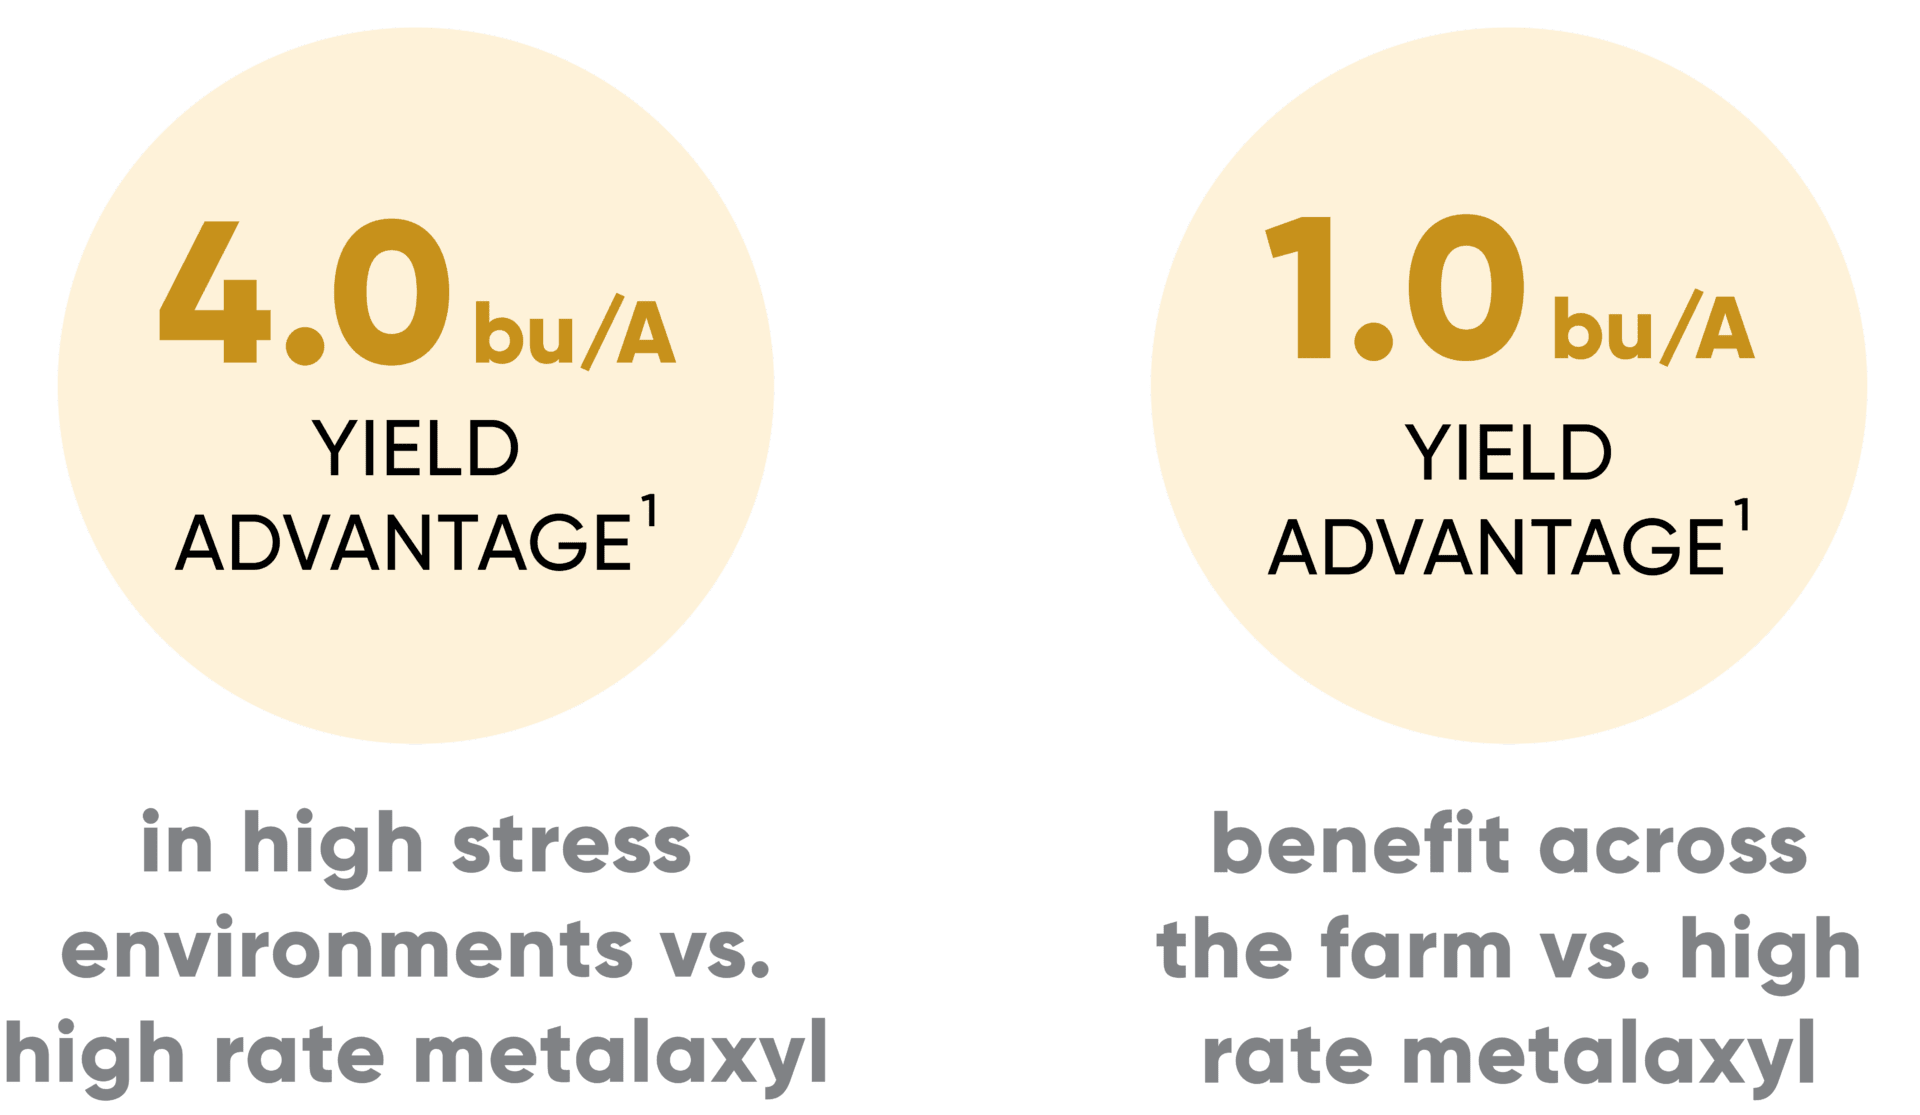 LumiTreo yield advantage in high stress environments and across the farm.